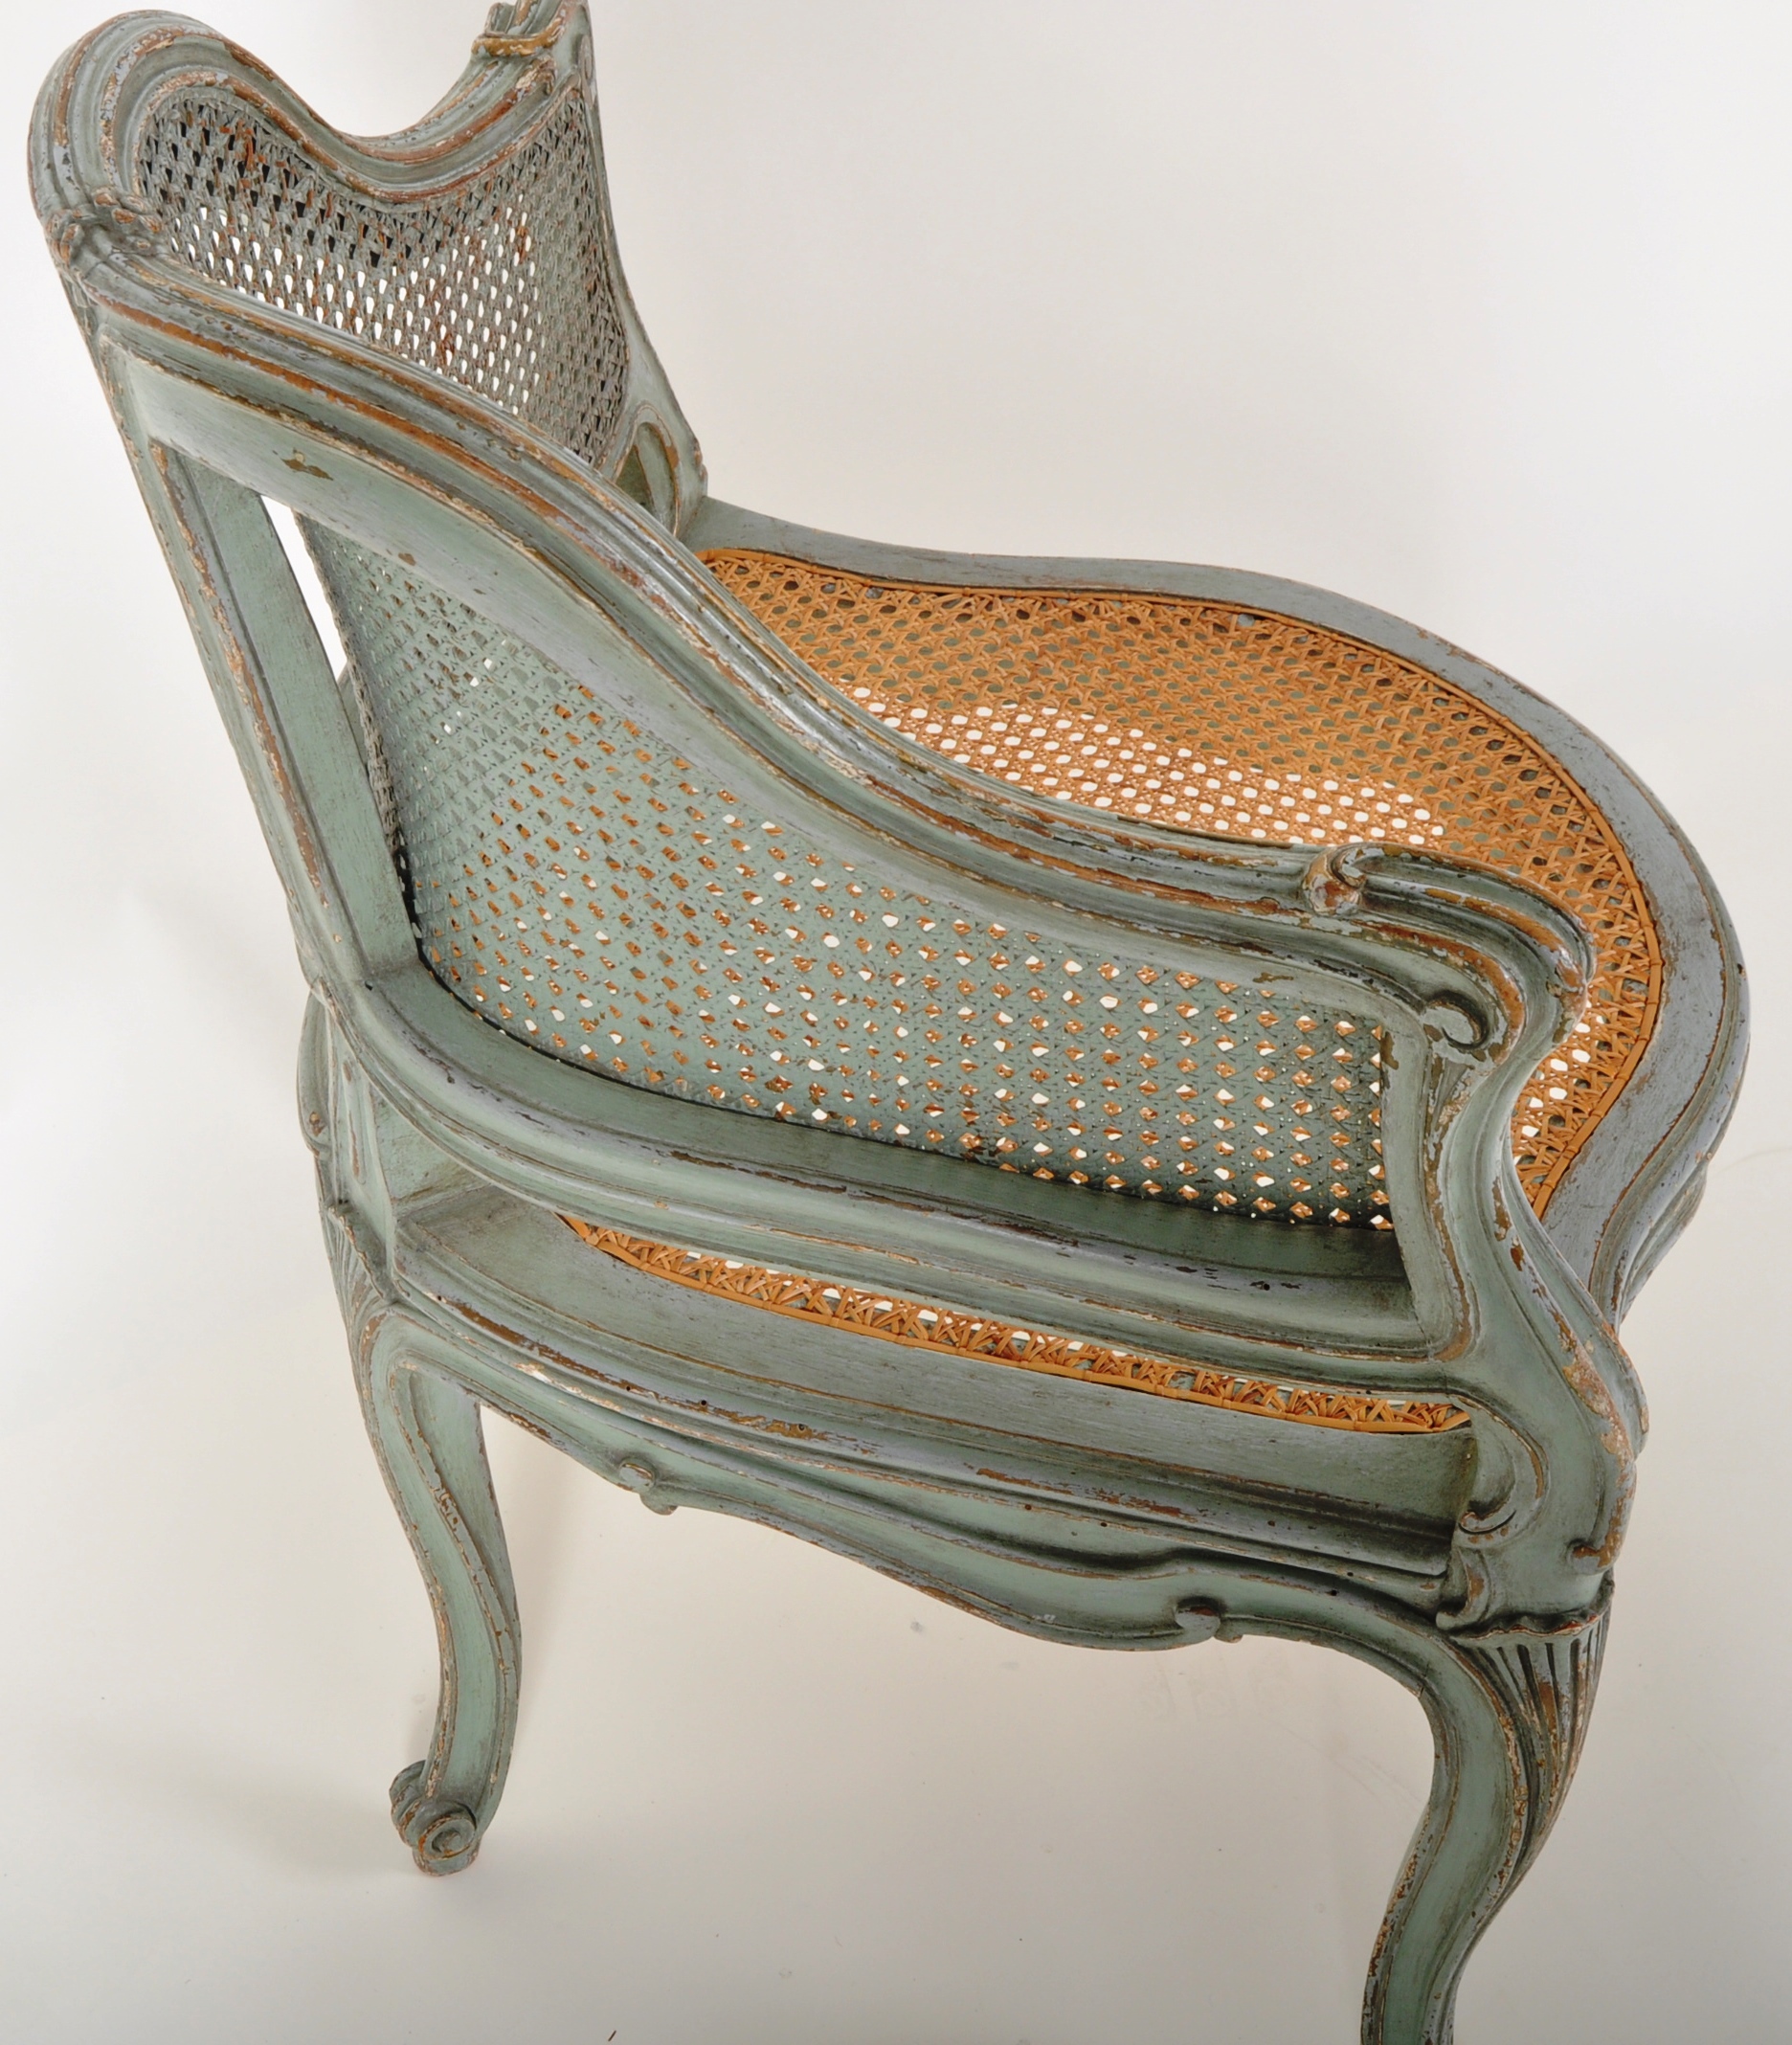 19TH CENTURY FRENCH BERGERE CORNER CHAIR - Image 10 of 13